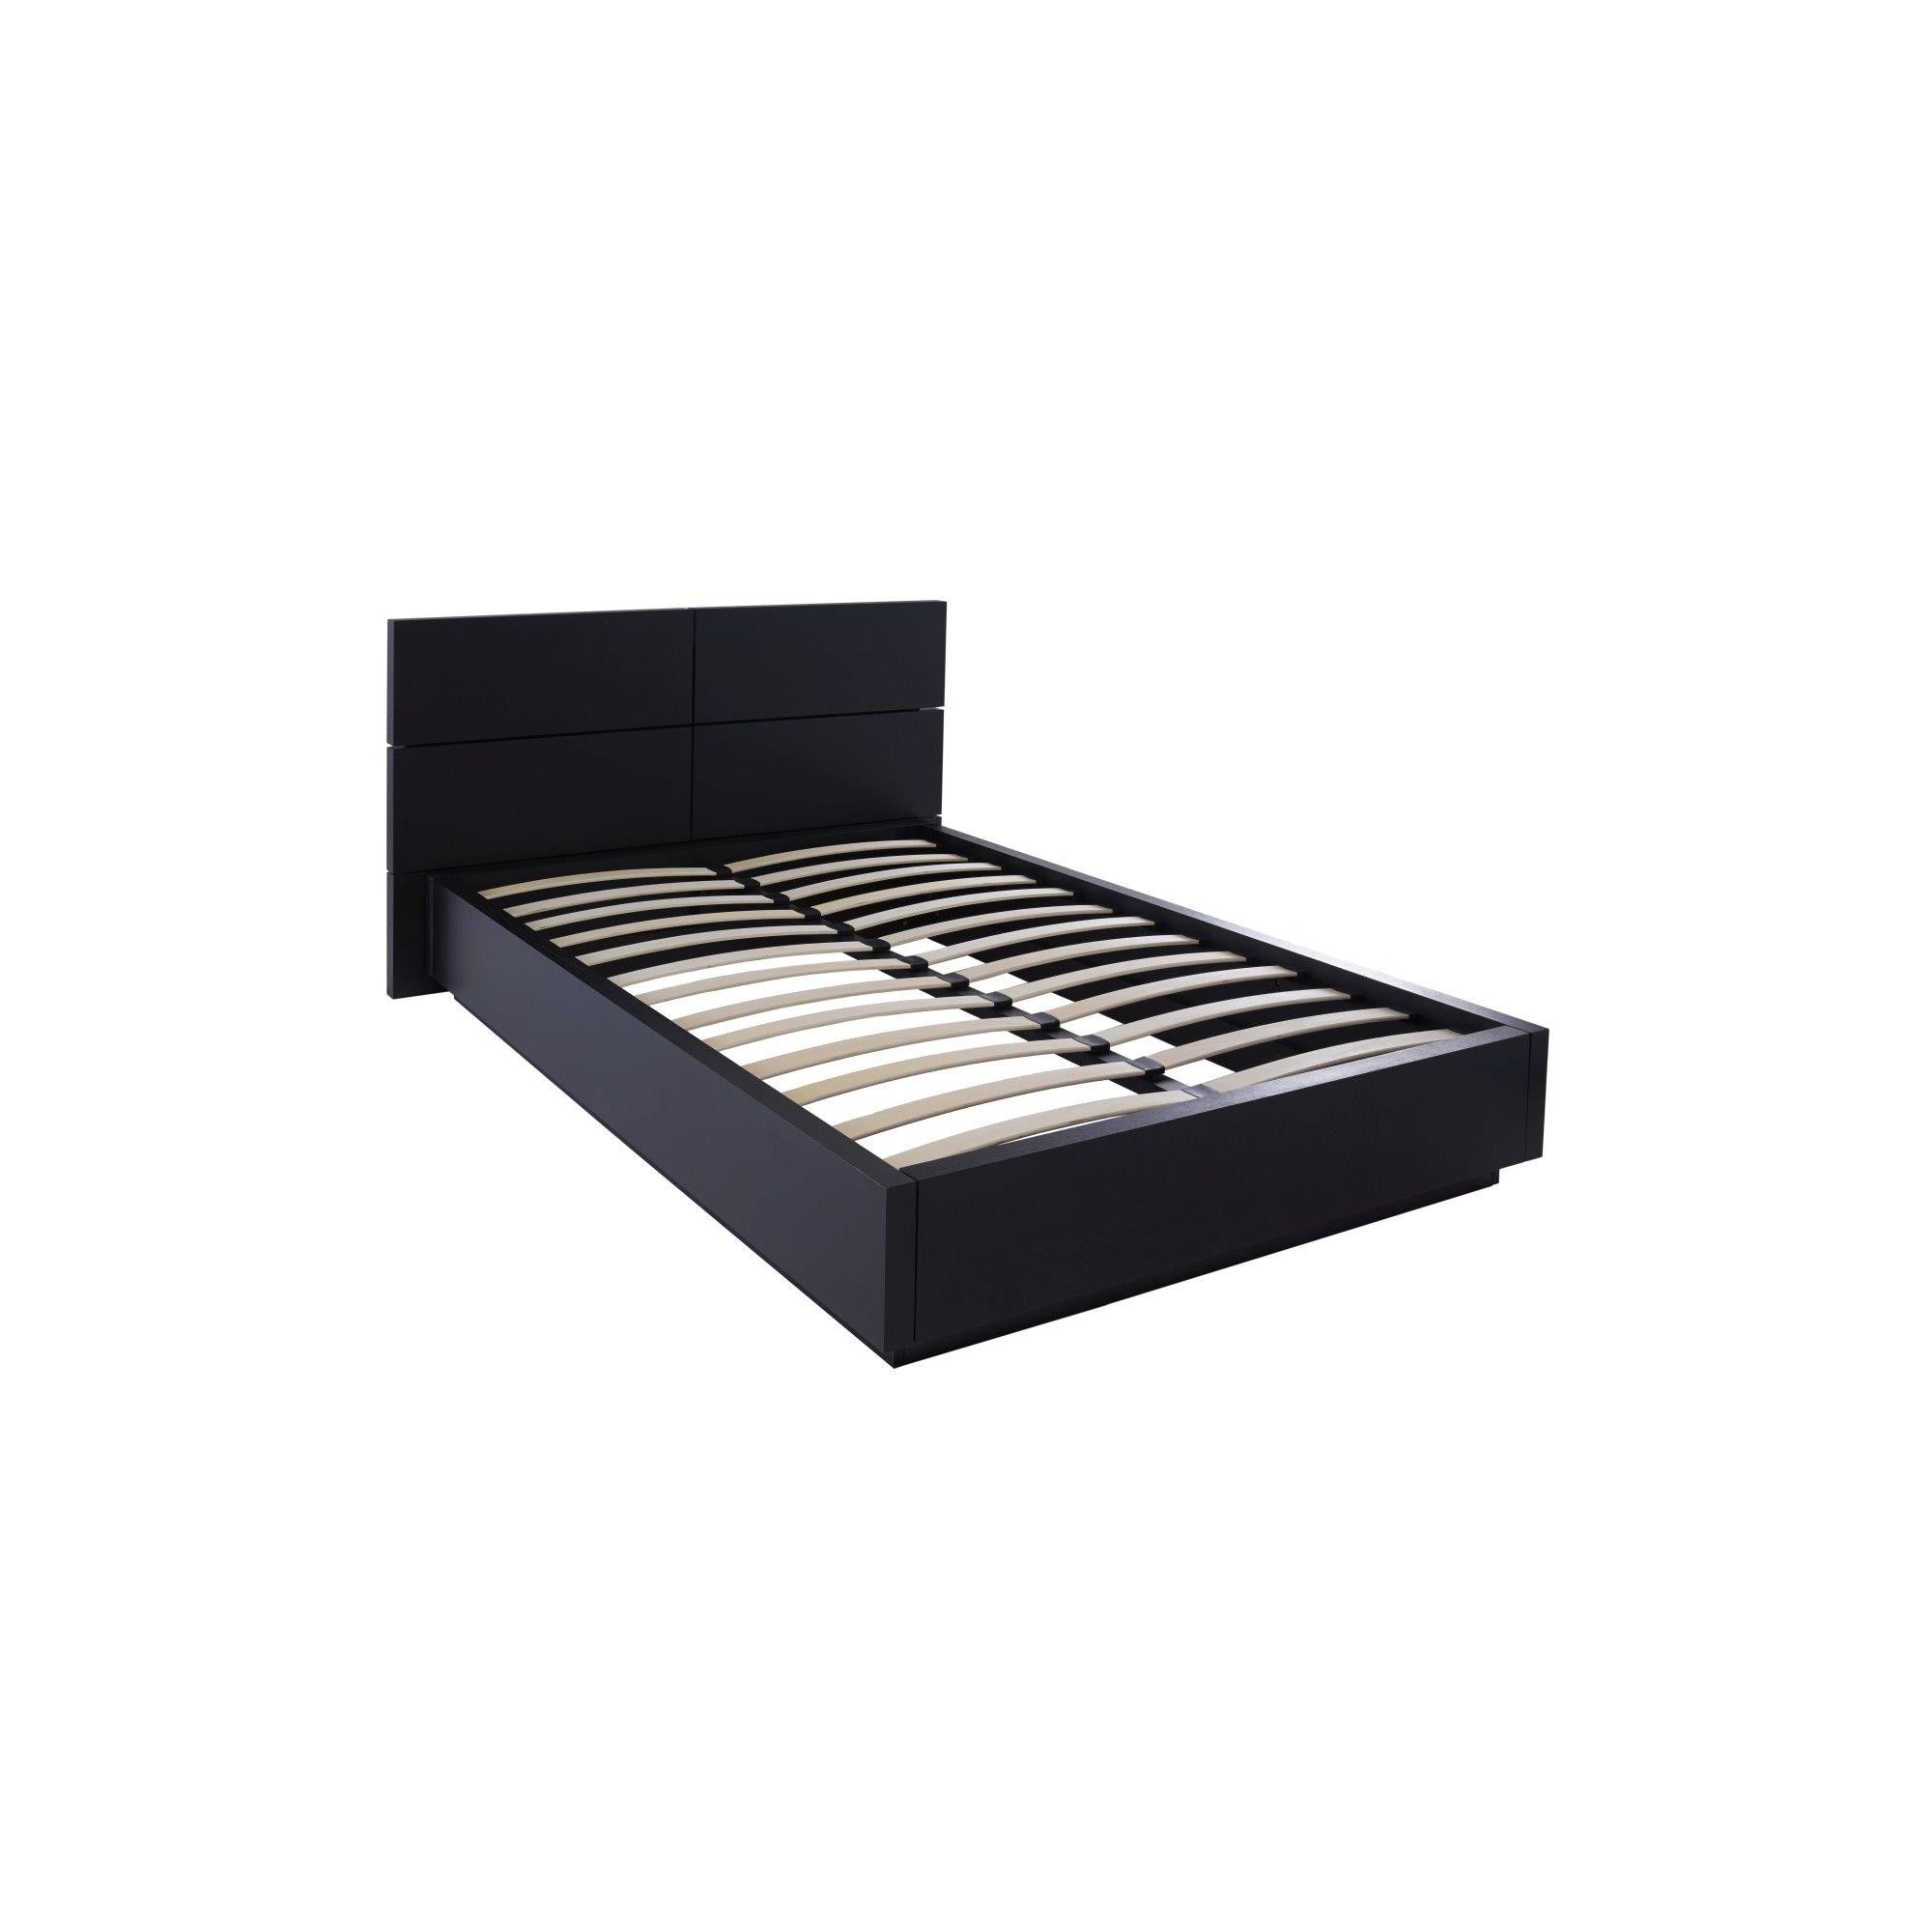 Gillmore Space Cordoba Bed - Double at Tesco Direct